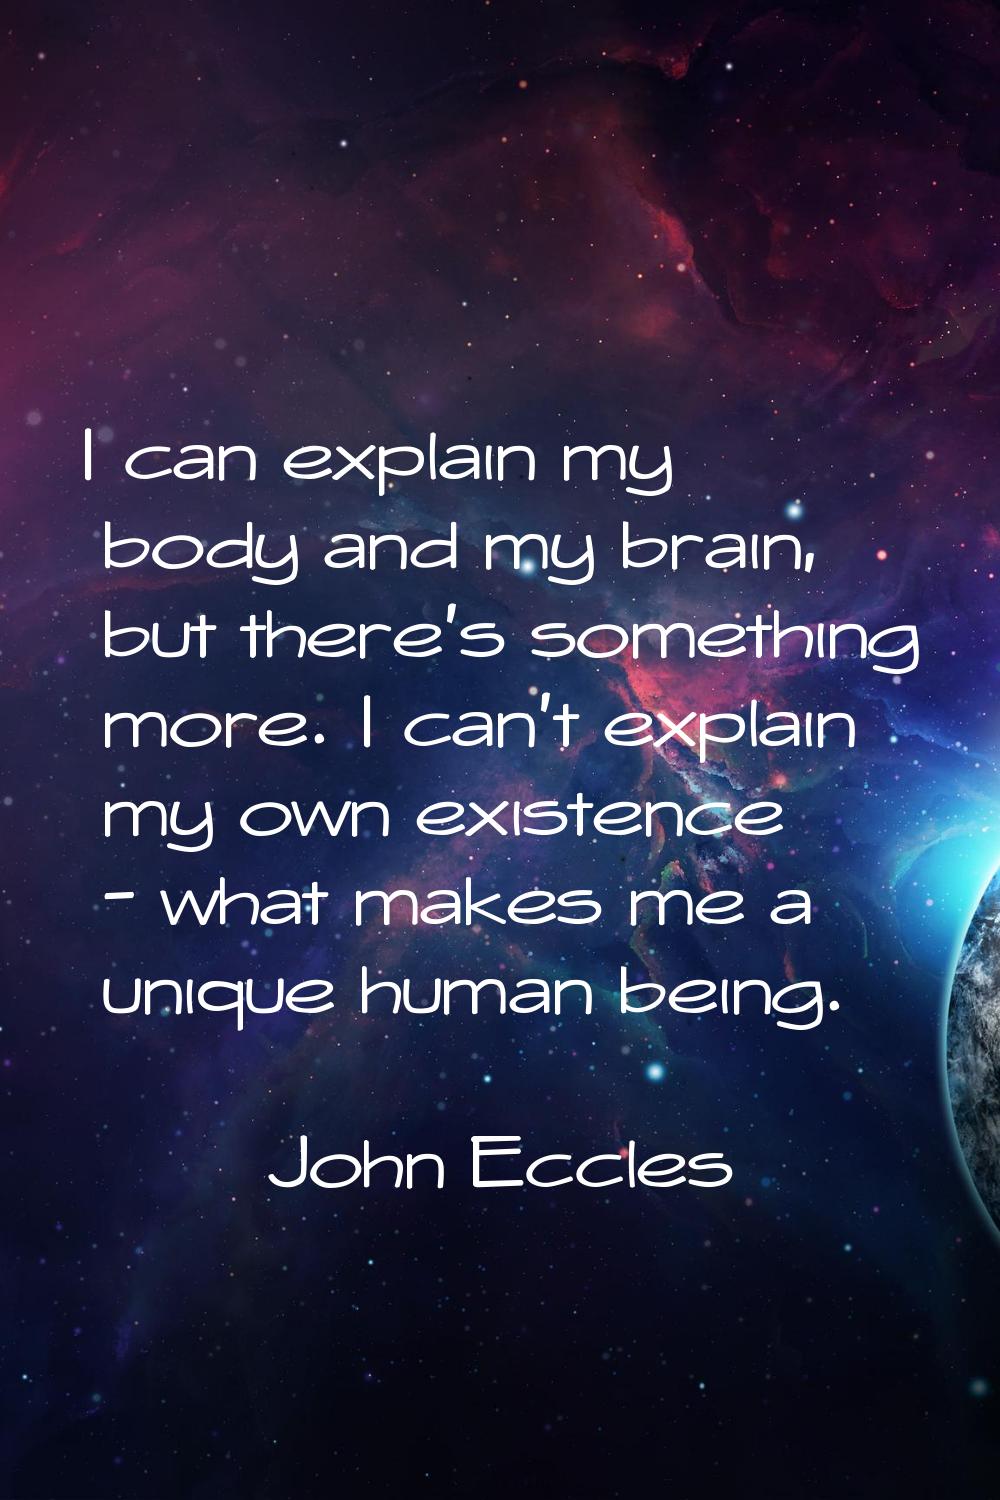 I can explain my body and my brain, but there's something more. I can't explain my own existence - 